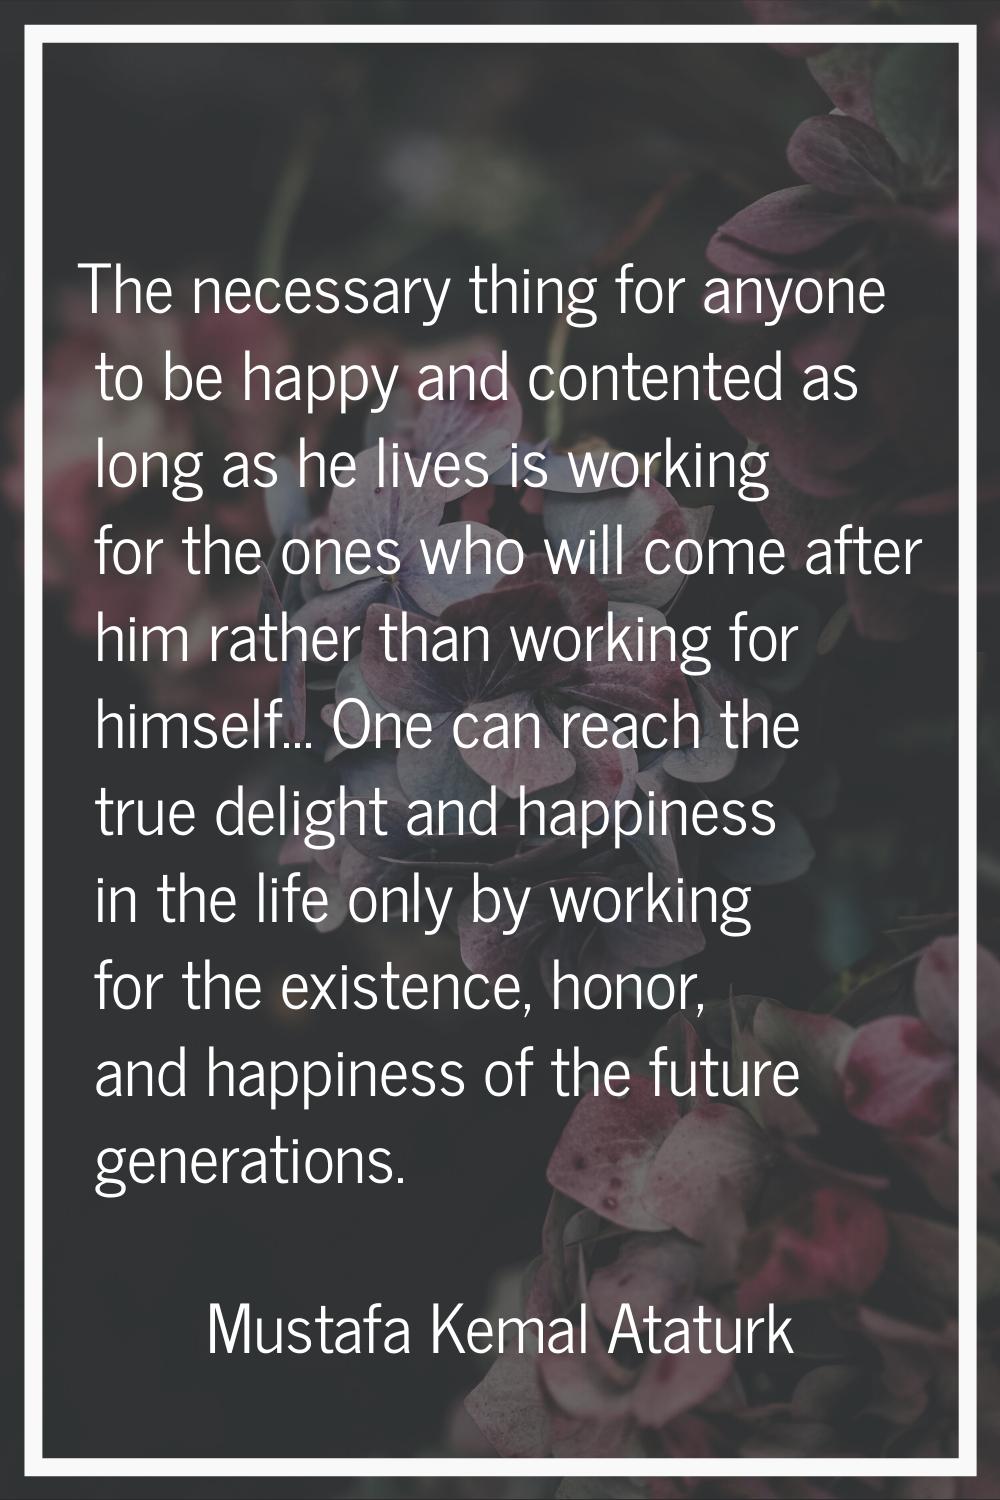 The necessary thing for anyone to be happy and contented as long as he lives is working for the one